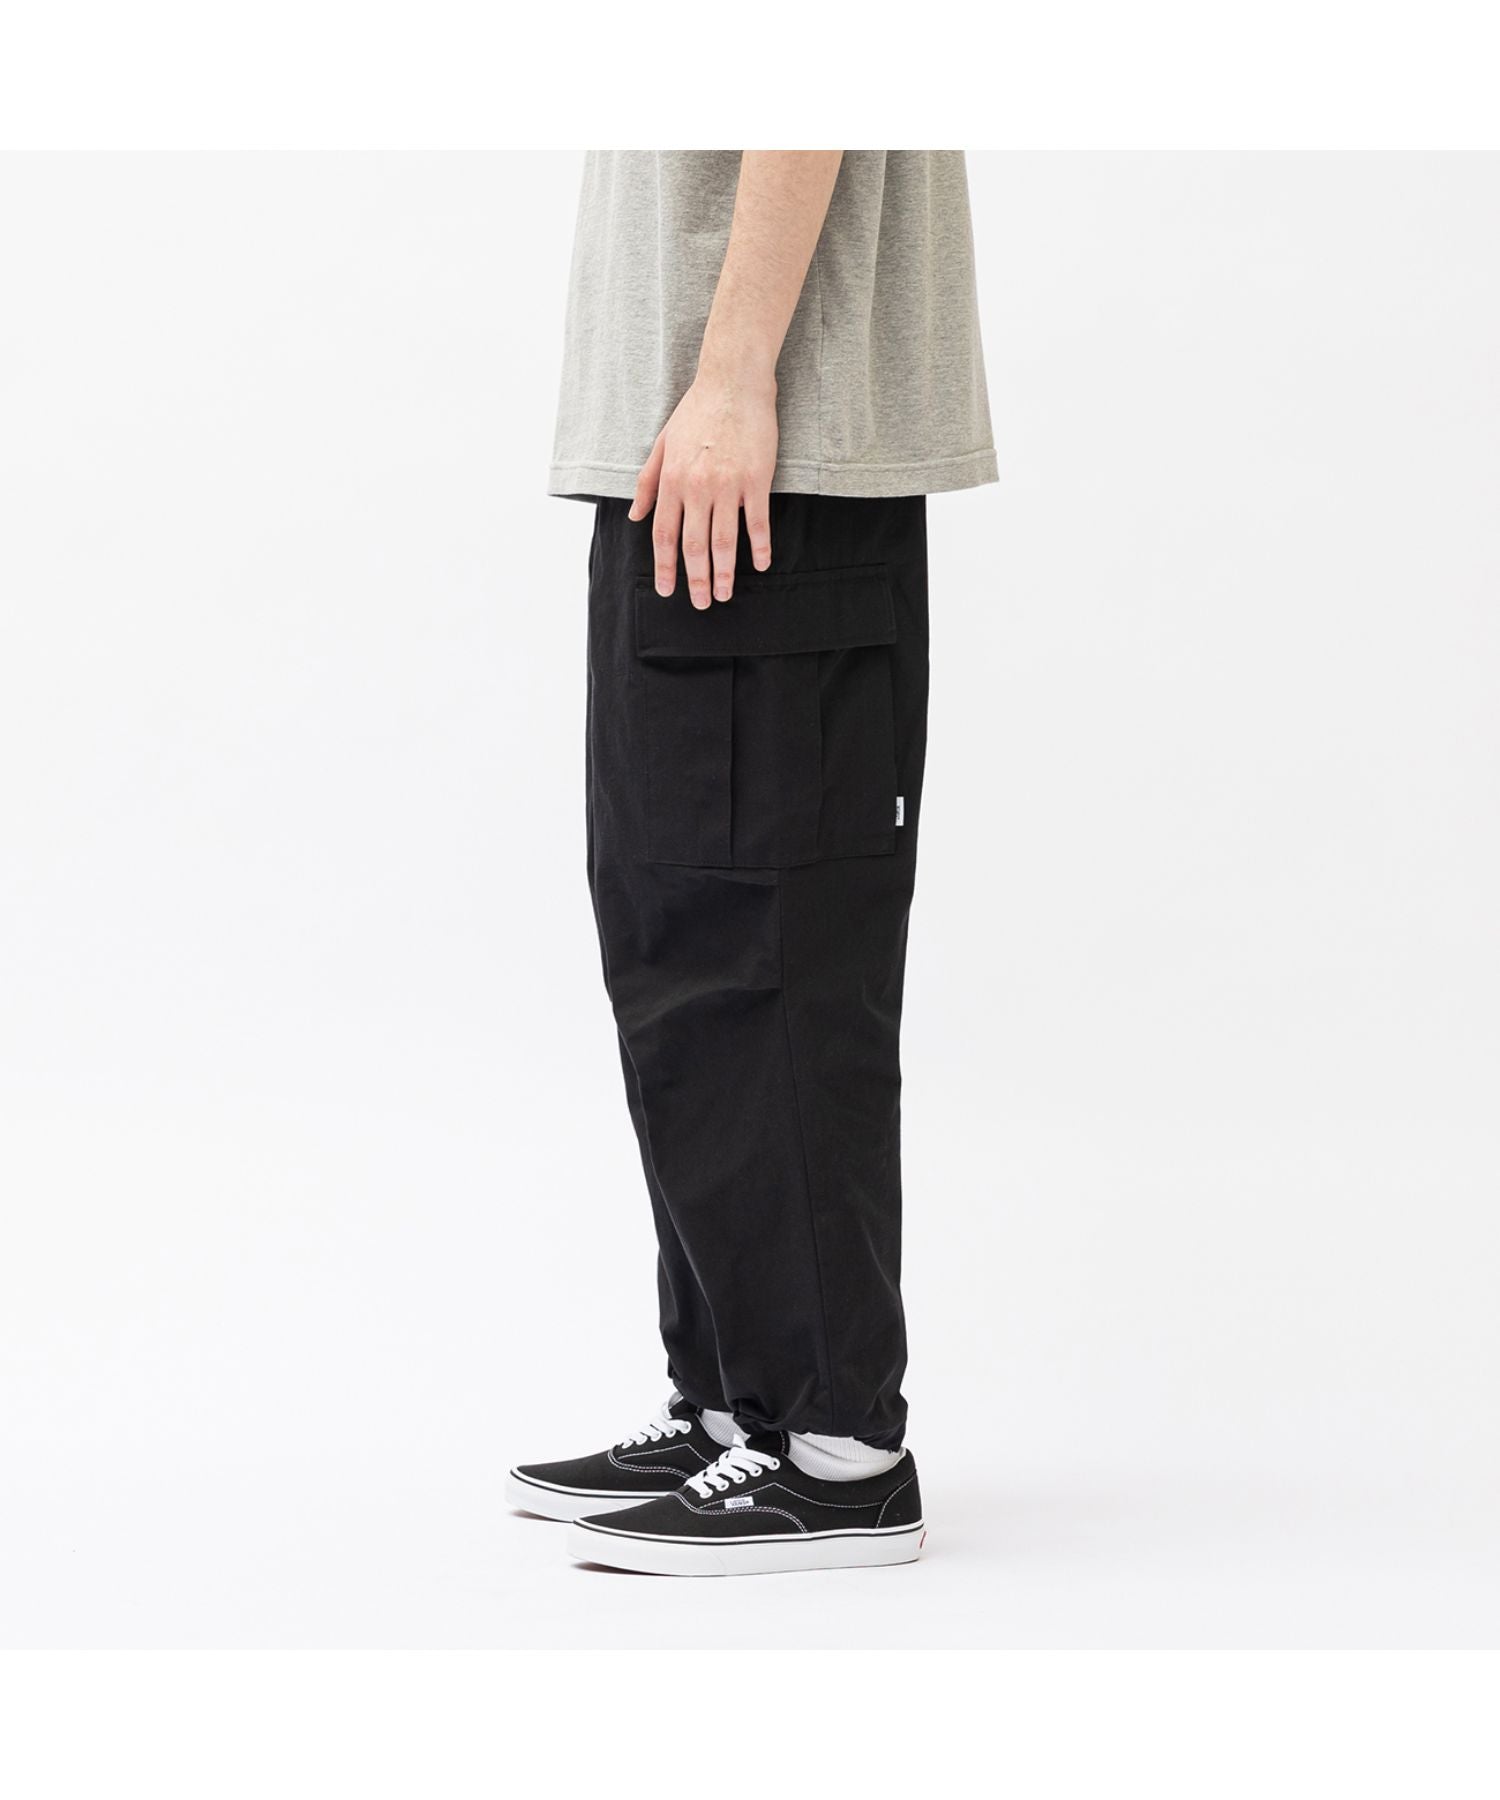 MILT9601 / TROUSERS / NYCO. RIPSTOP